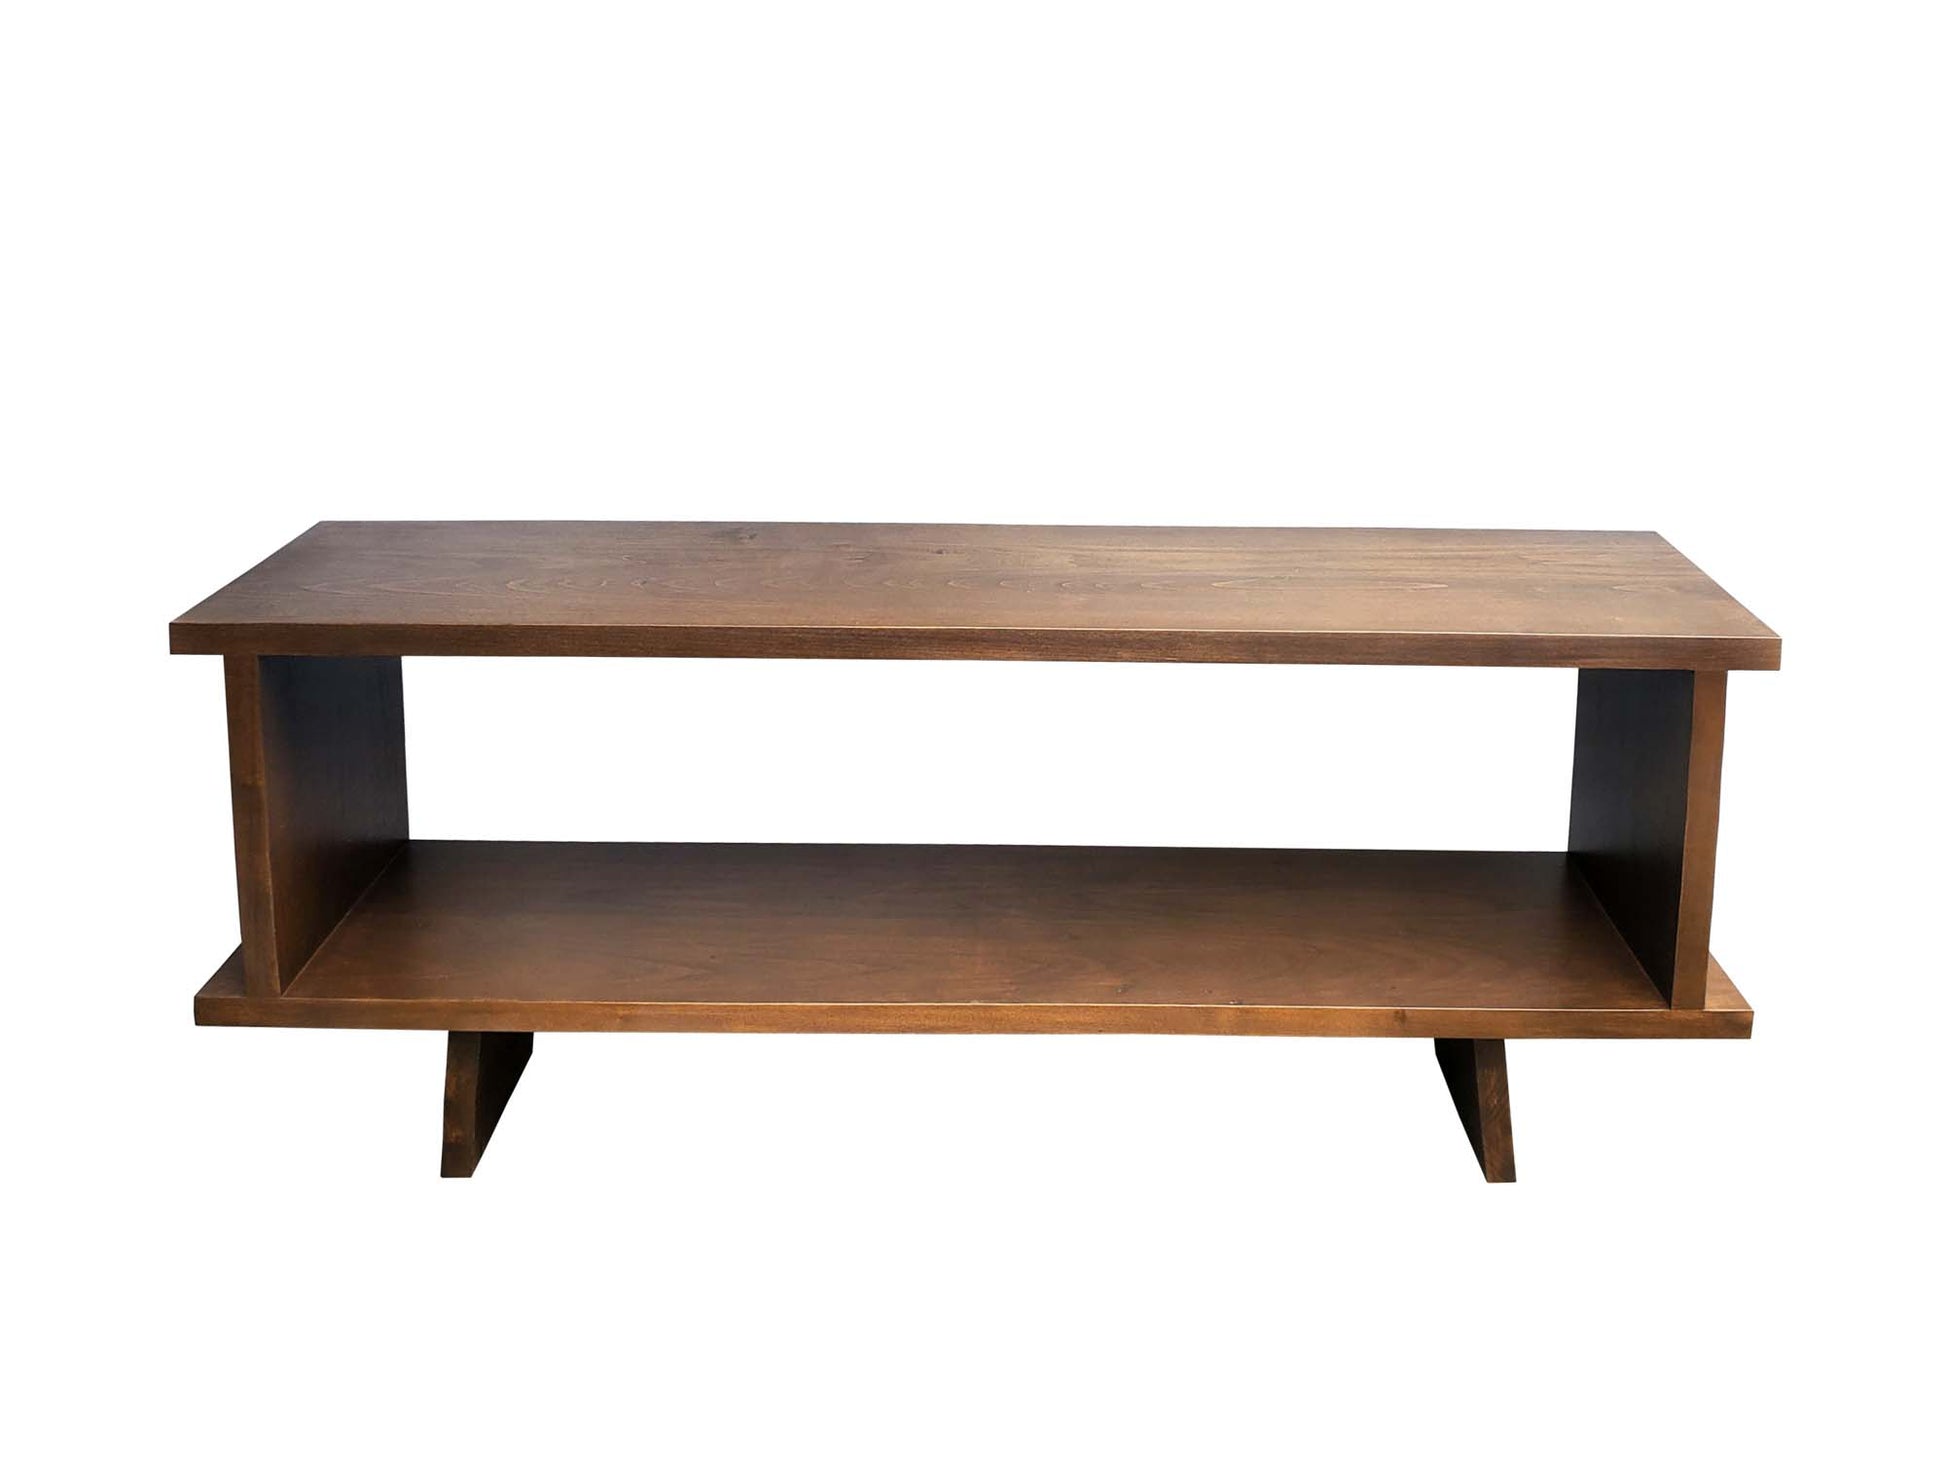 Kawai Entertainment Unit with stain finish